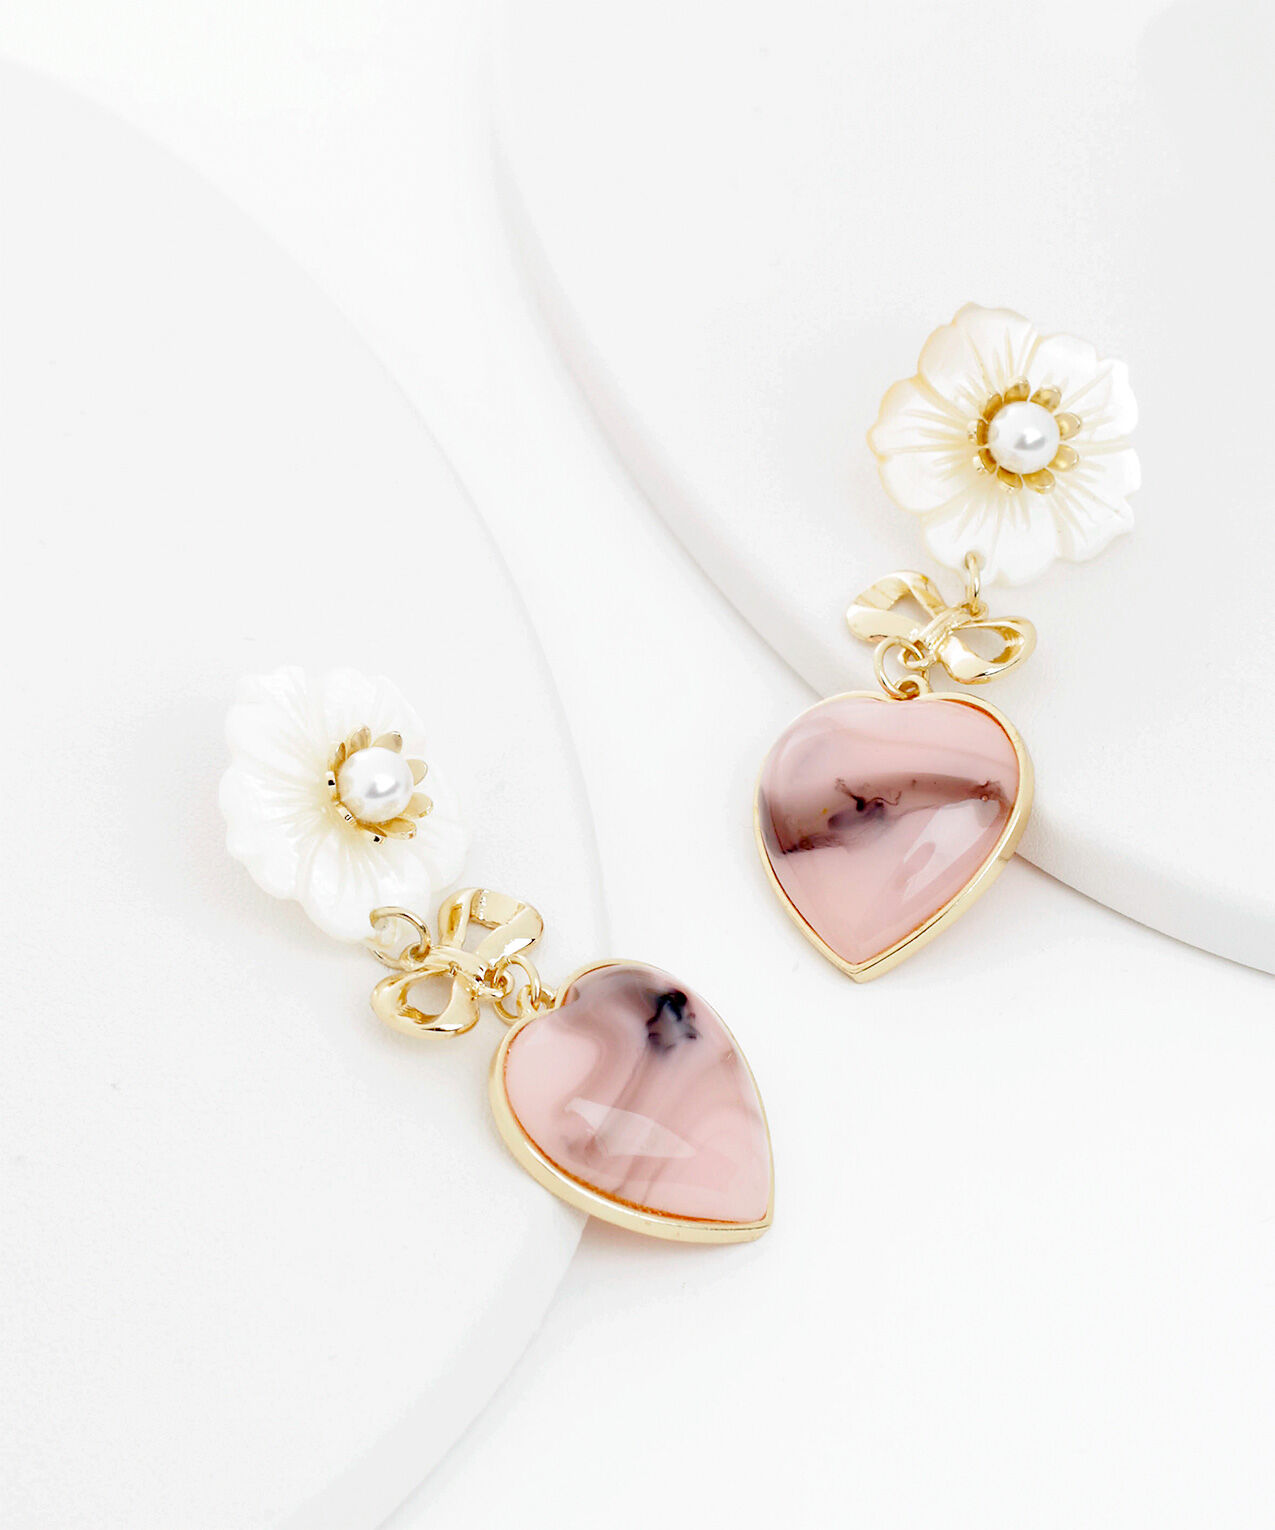 White Flower with Pink Heart Earrings